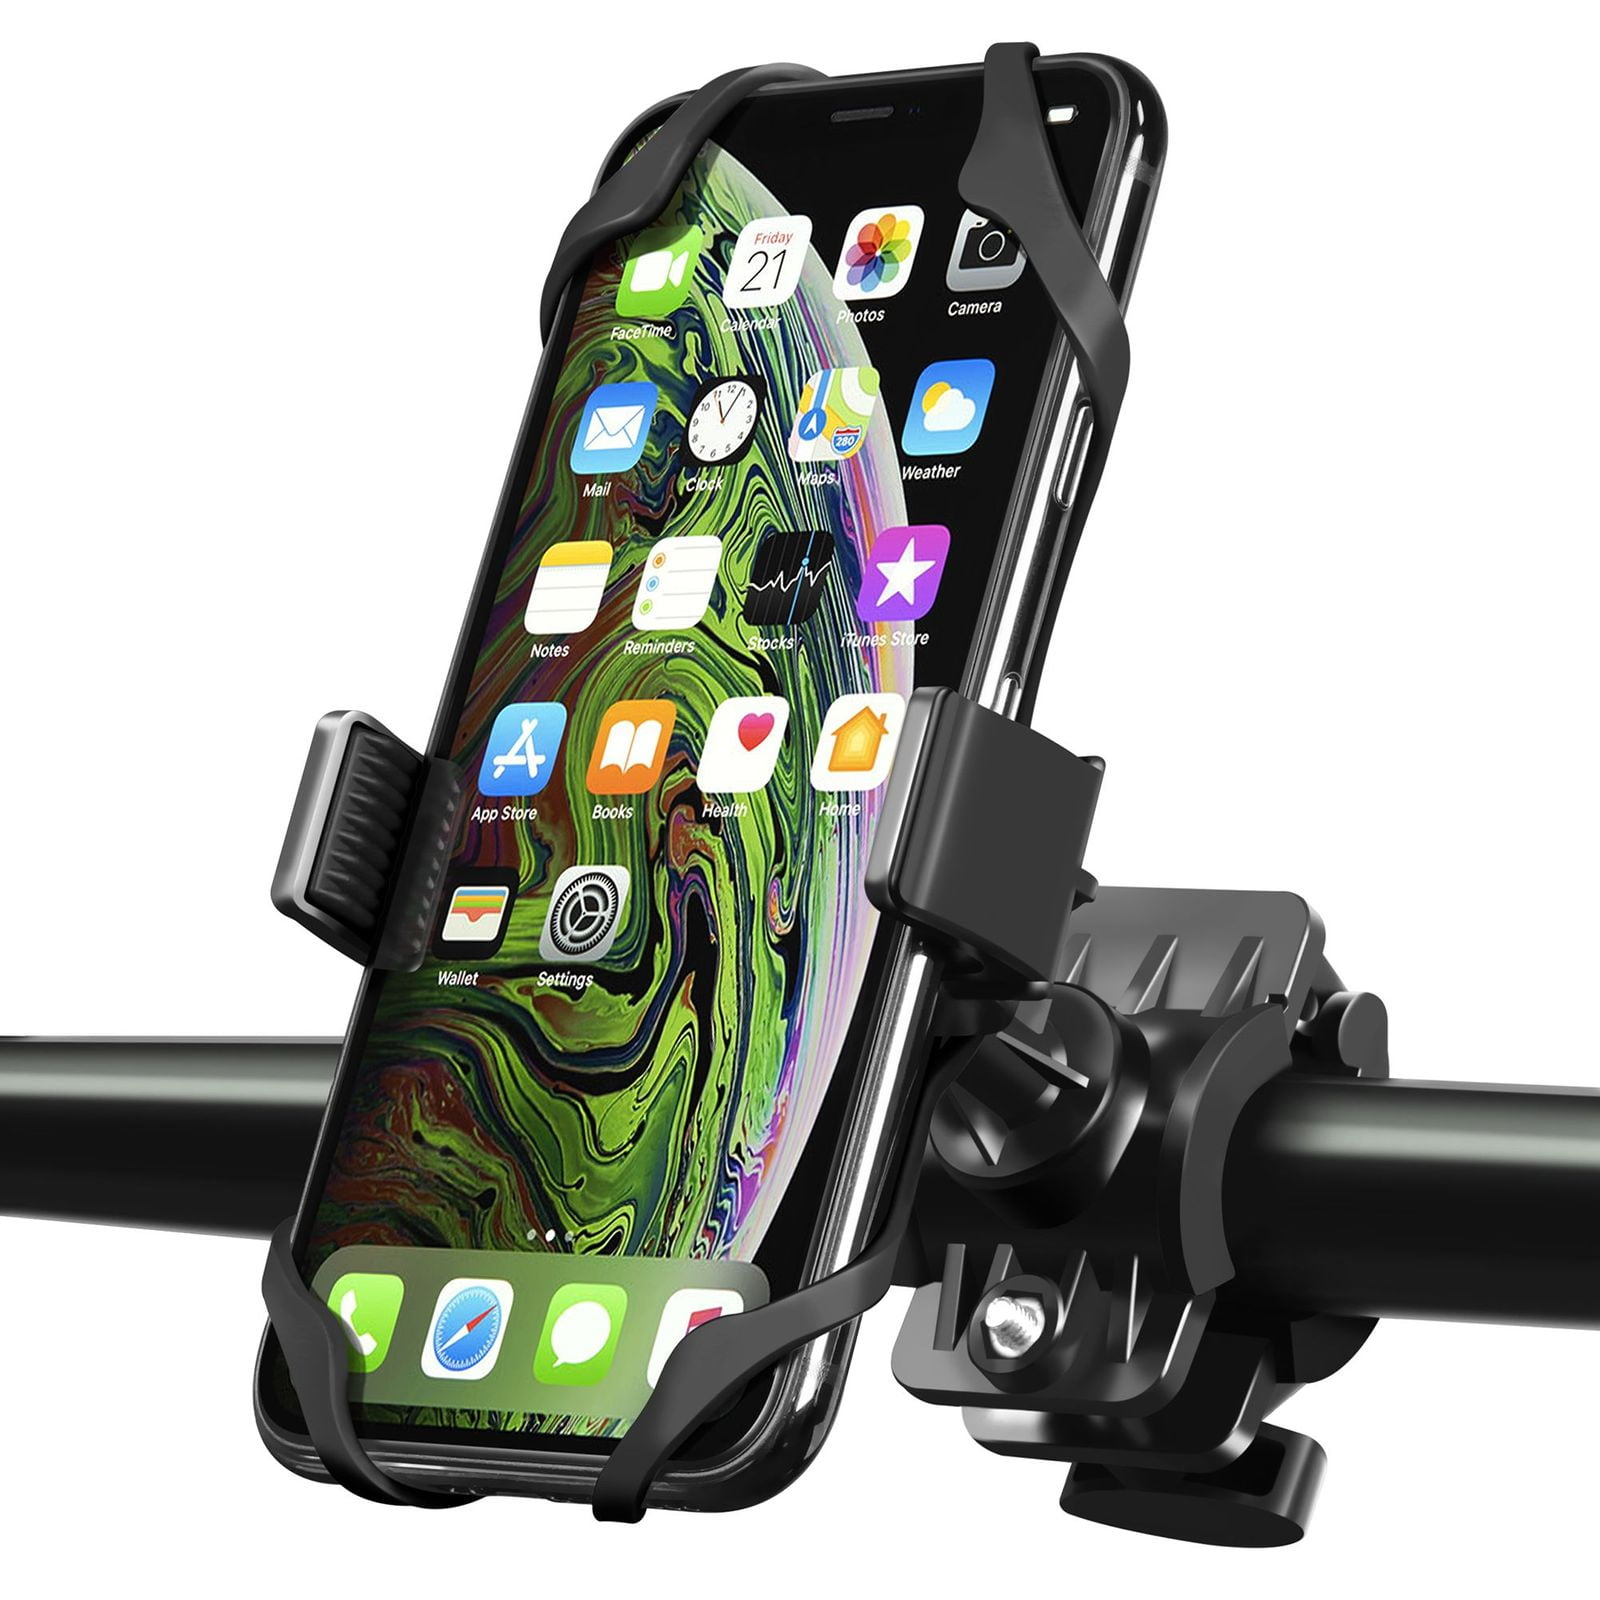 Camera Bicycle Mount Bike Motorcycle Bracket Holder For Recording Video Stable